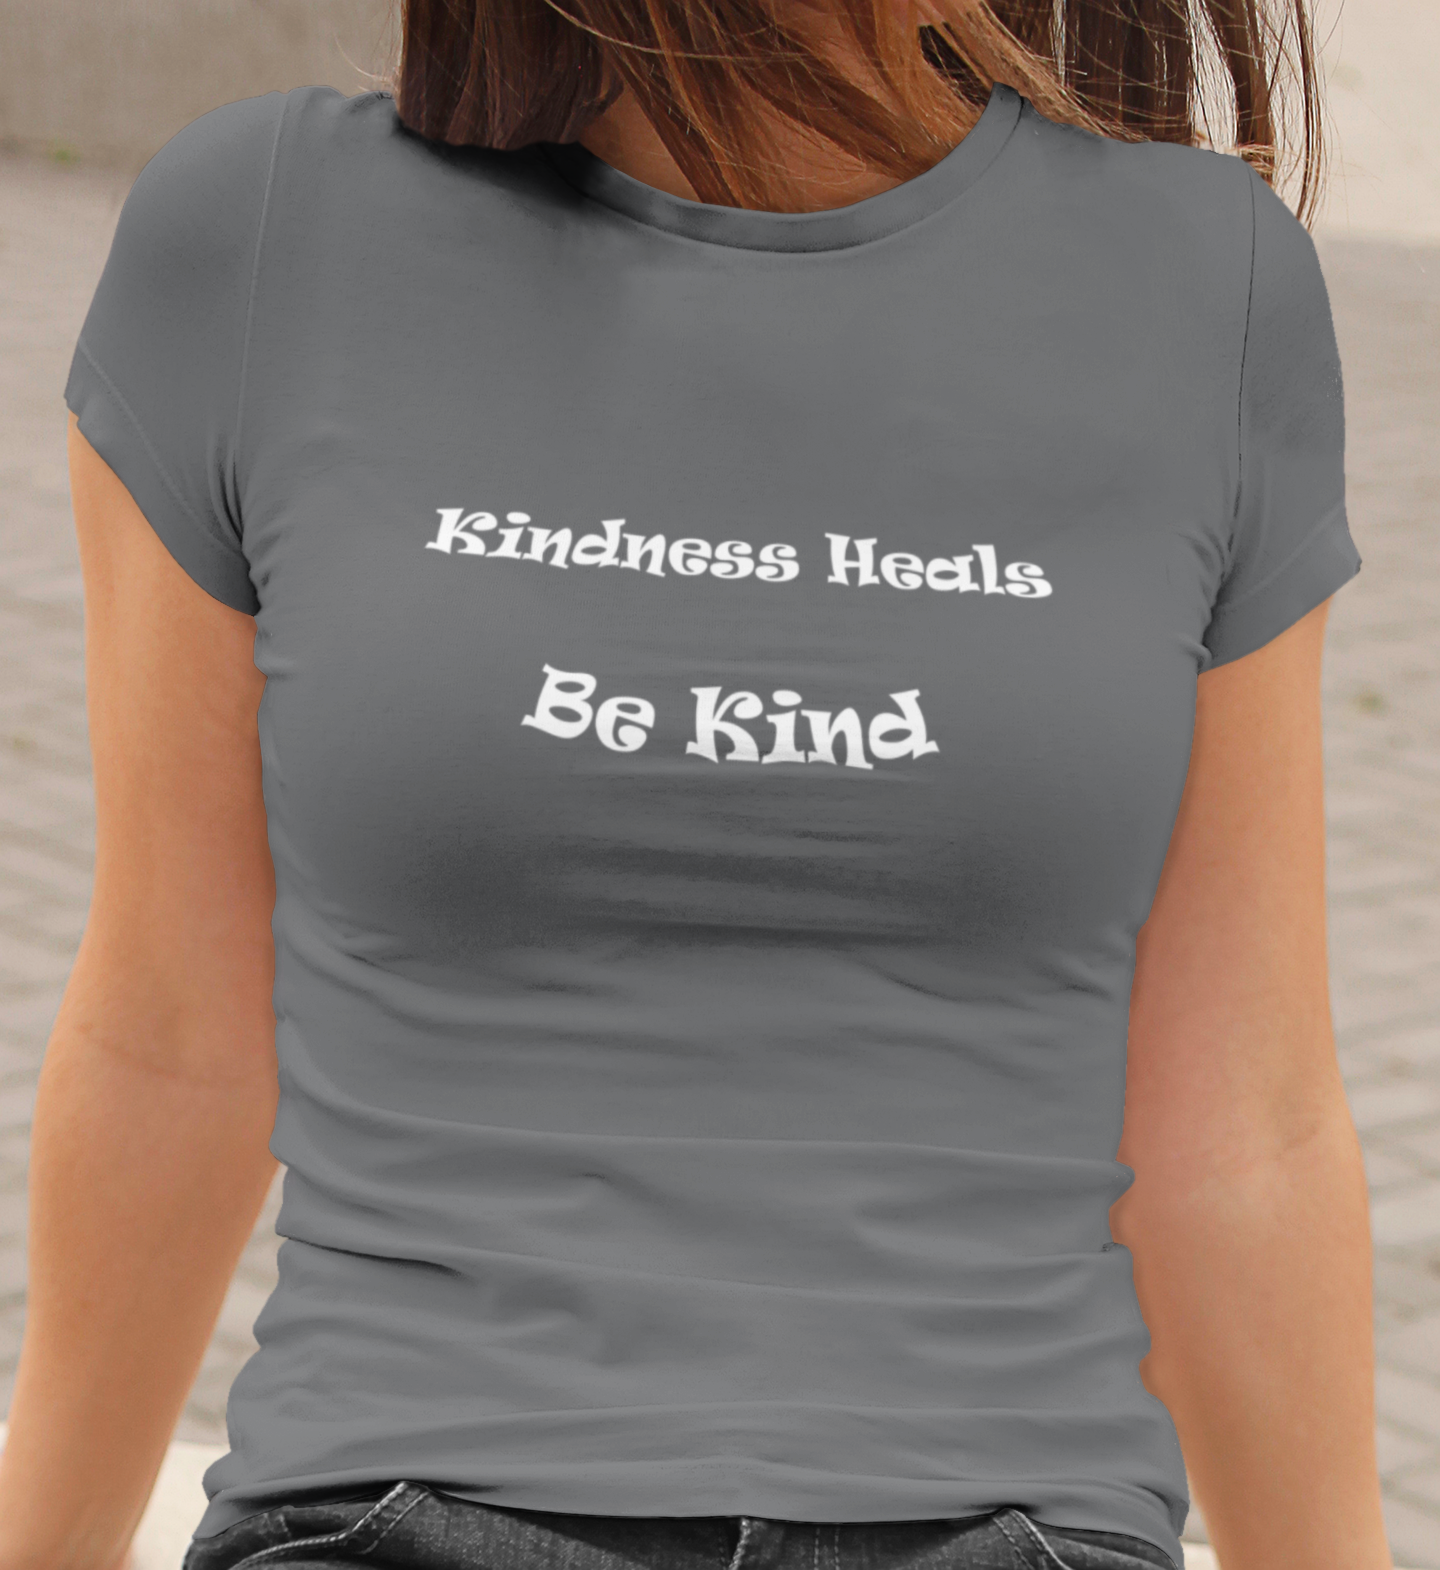 Short Sleeve Tee Bella & Canvas "Kindness" in 12 Colors and 7 Sizes (4488982003806)